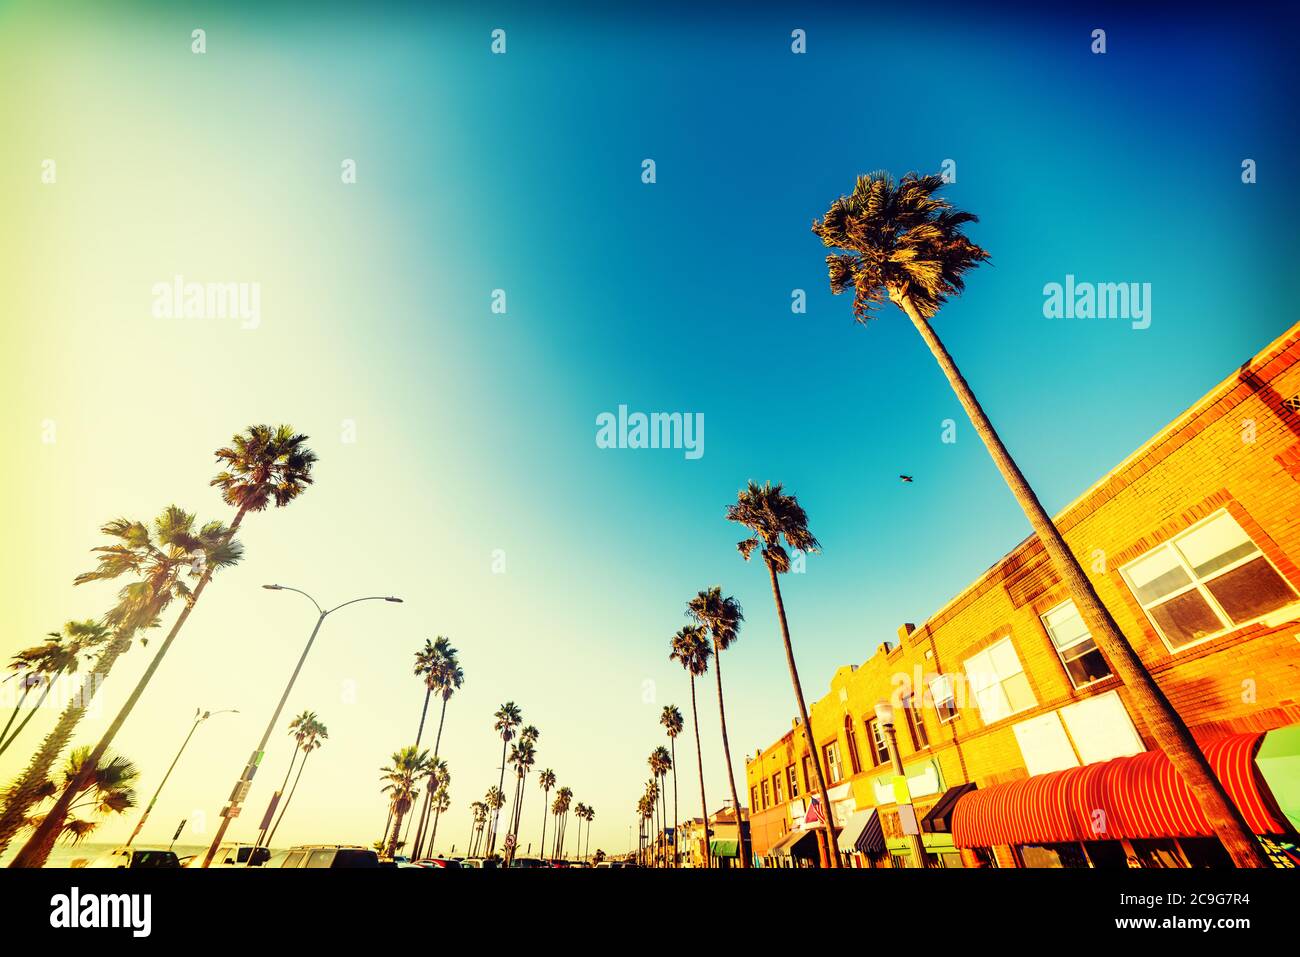 Palm trees and picturesque stores in Newport Beach seafront, Orange County. Southern California, USA Stock Photo